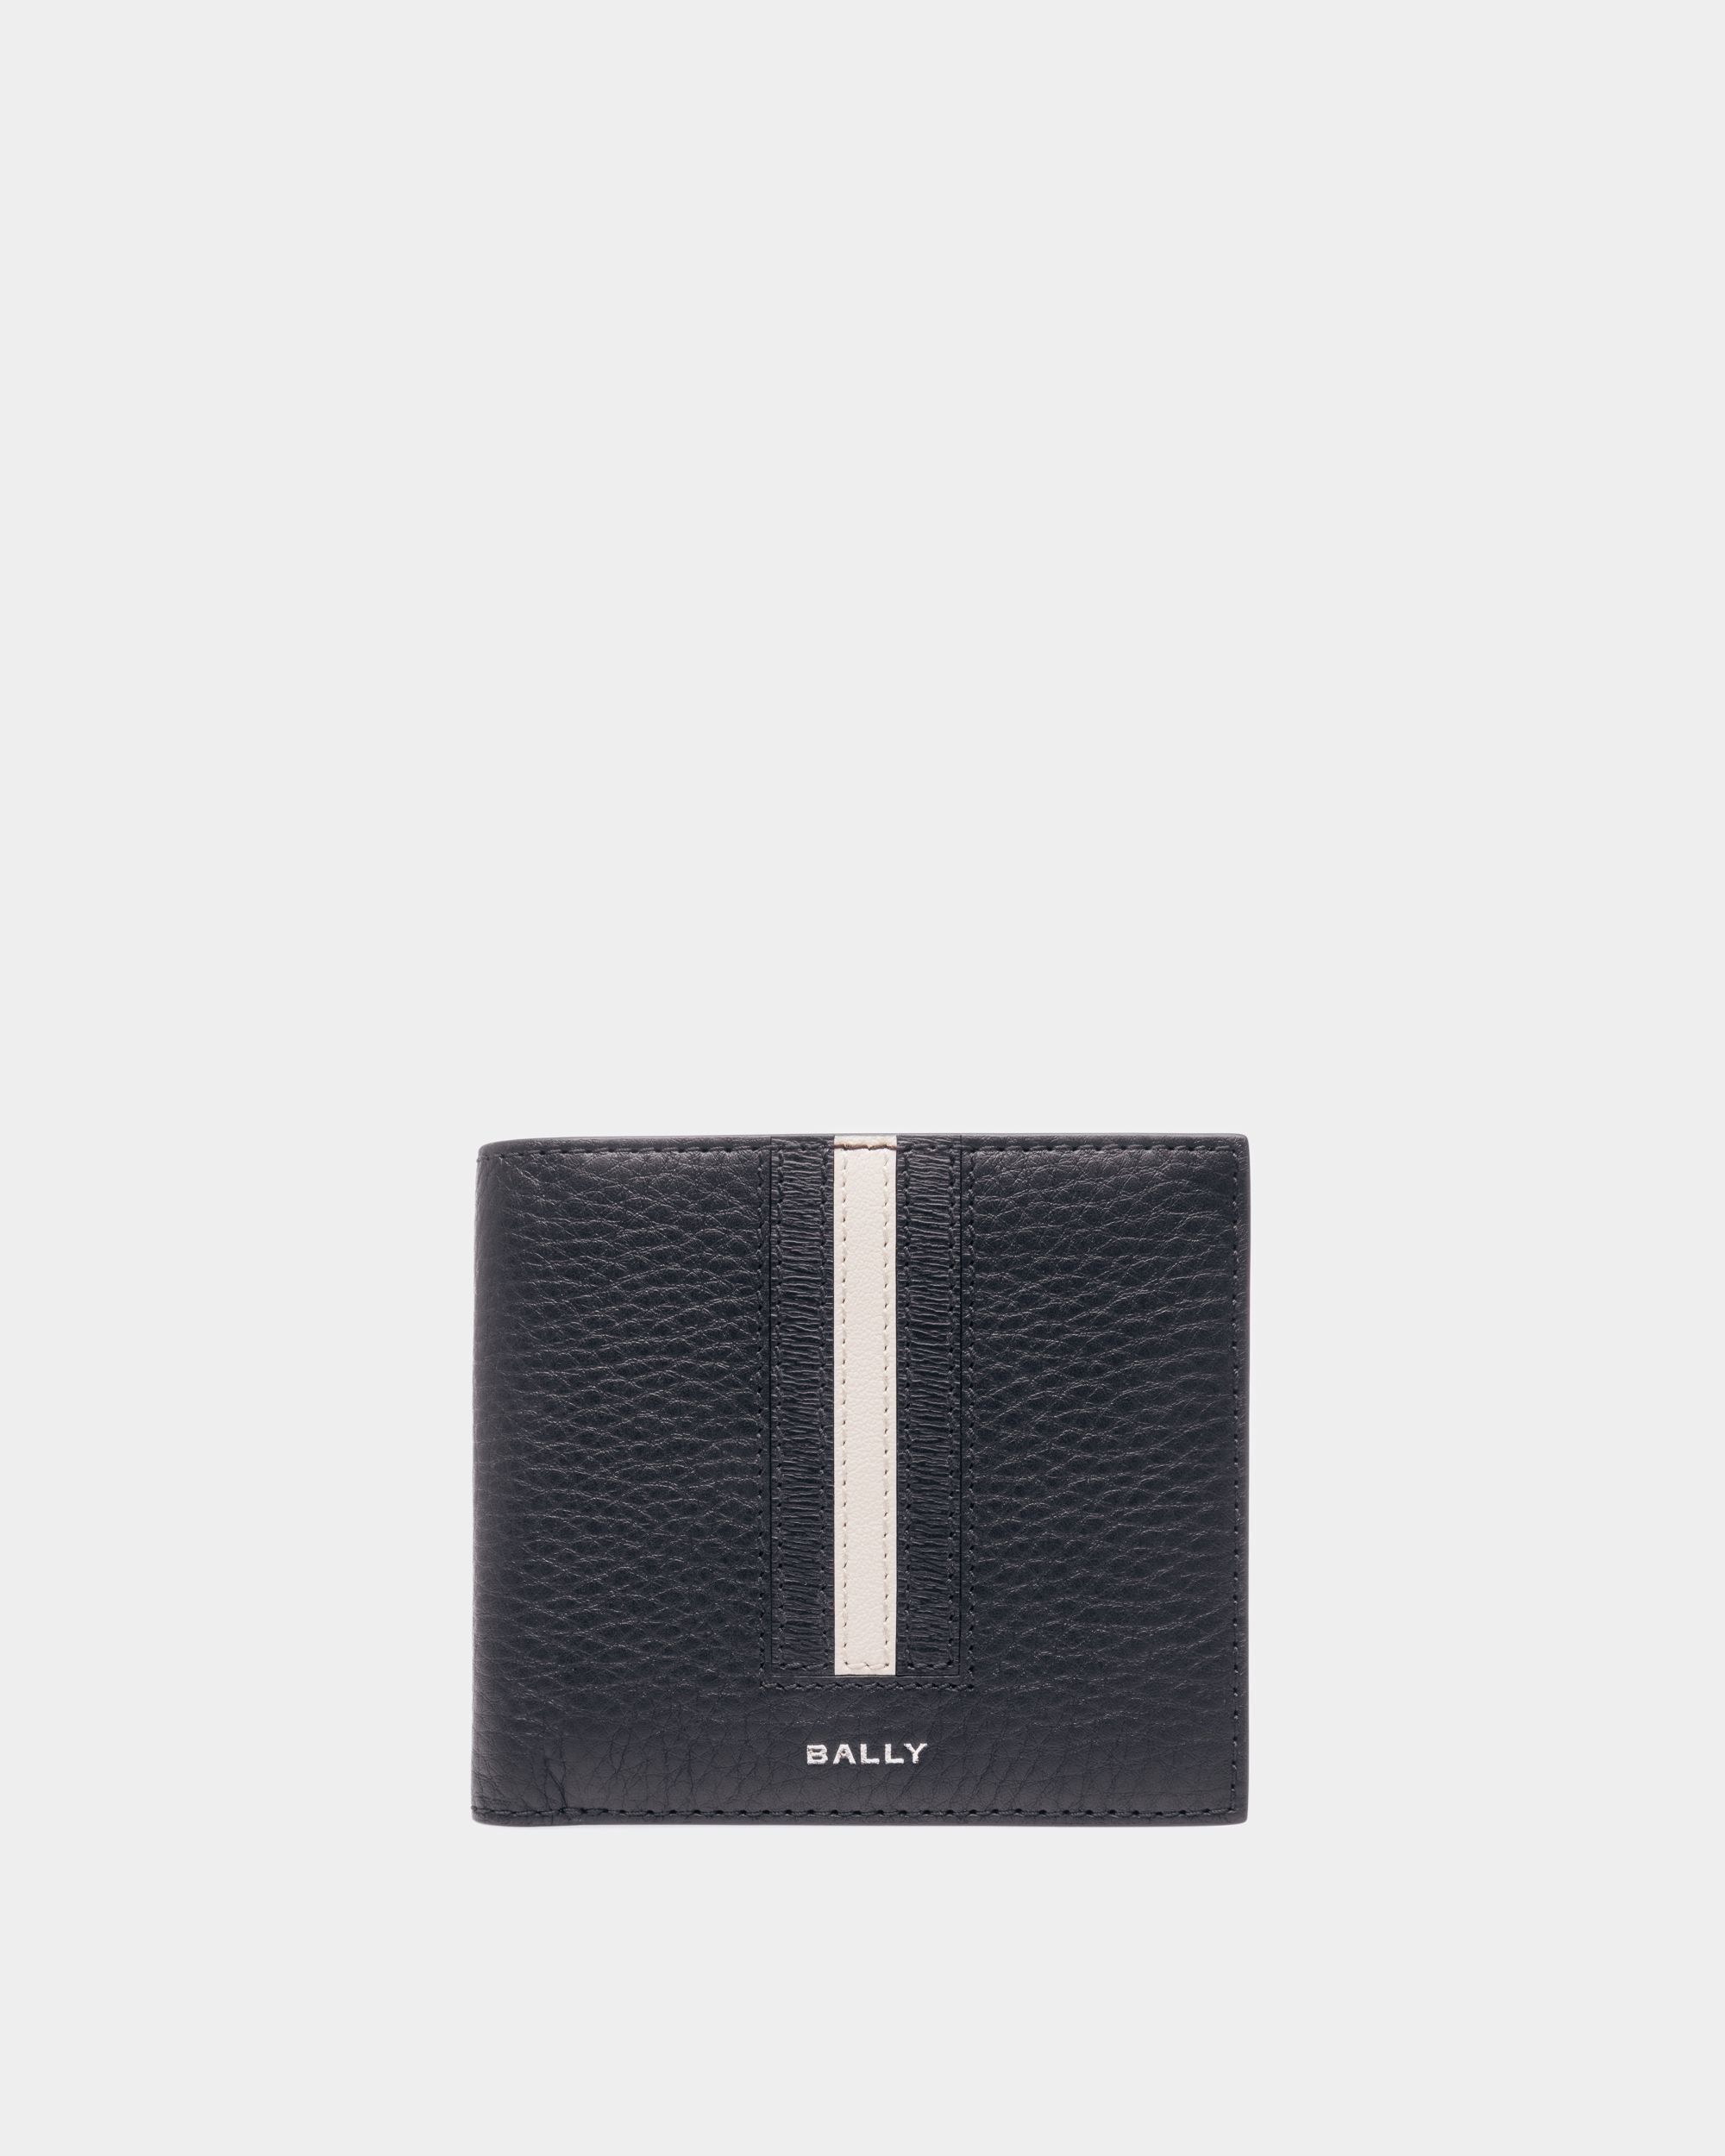 Ribbon Bi-fold Coin Wallet | Men's Wallets And Coin Purses | Midnight Leather | Bally | Still Life Front